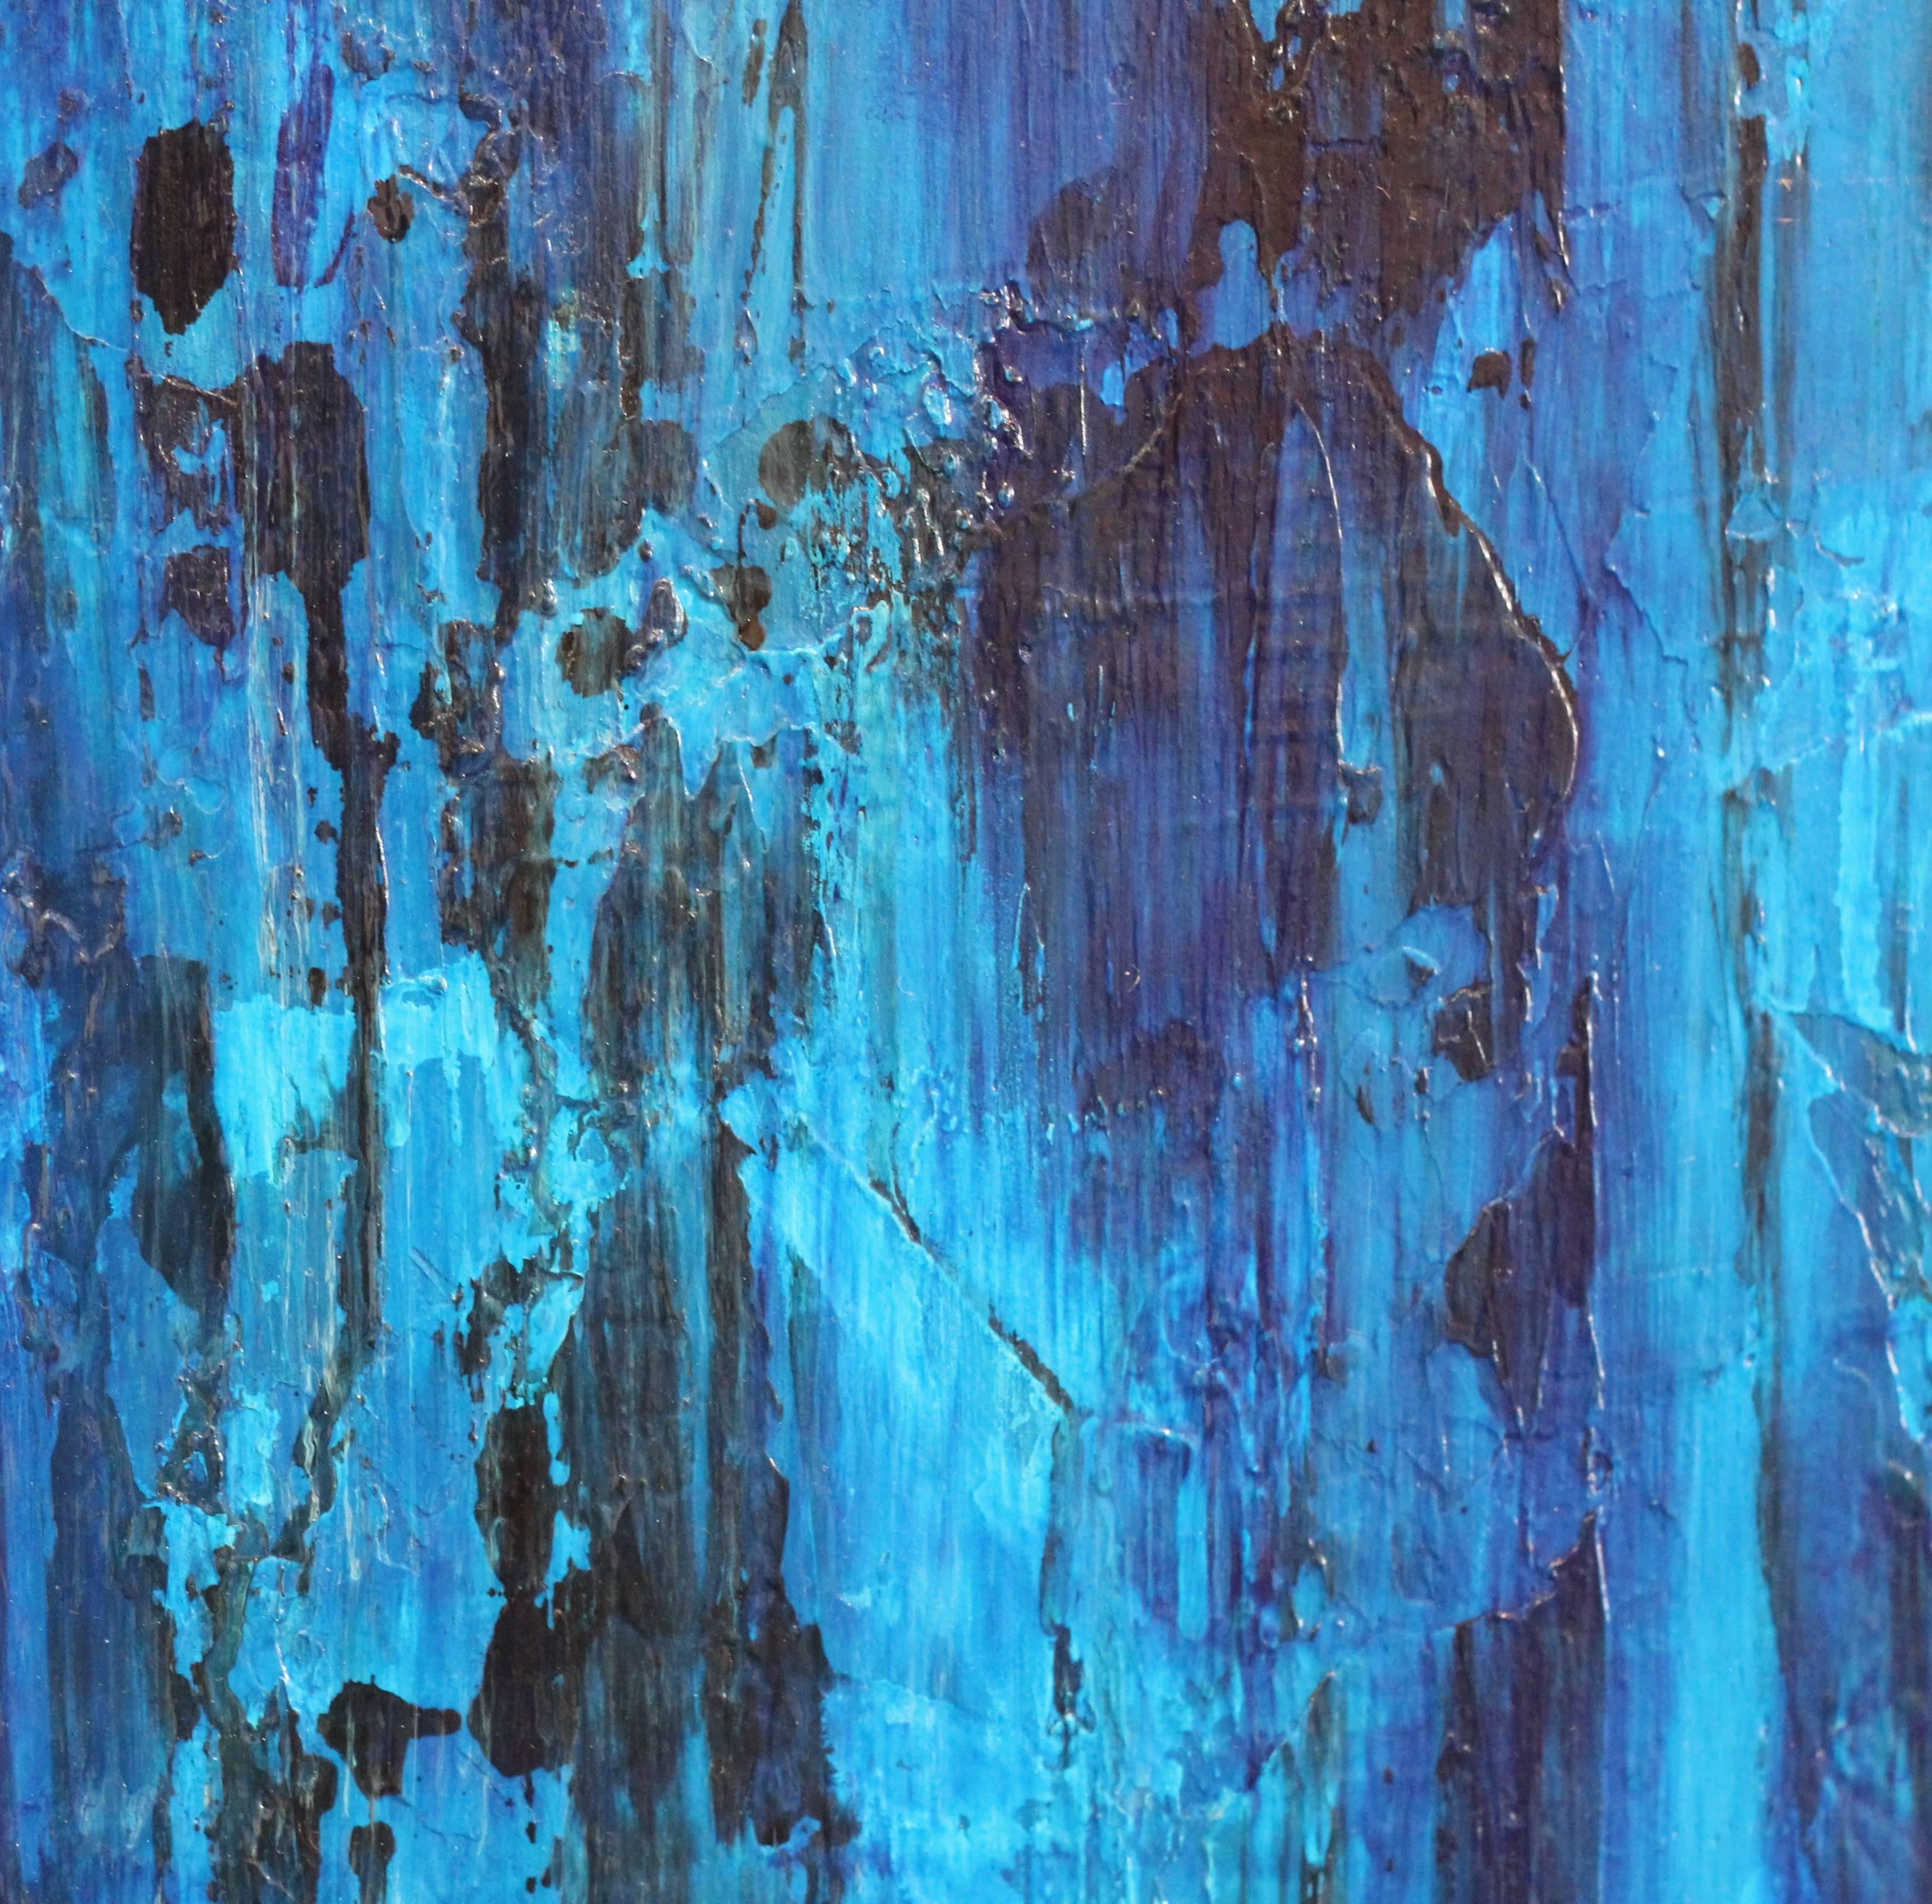 Evening Blues - Abstract Painting by Clara Berta